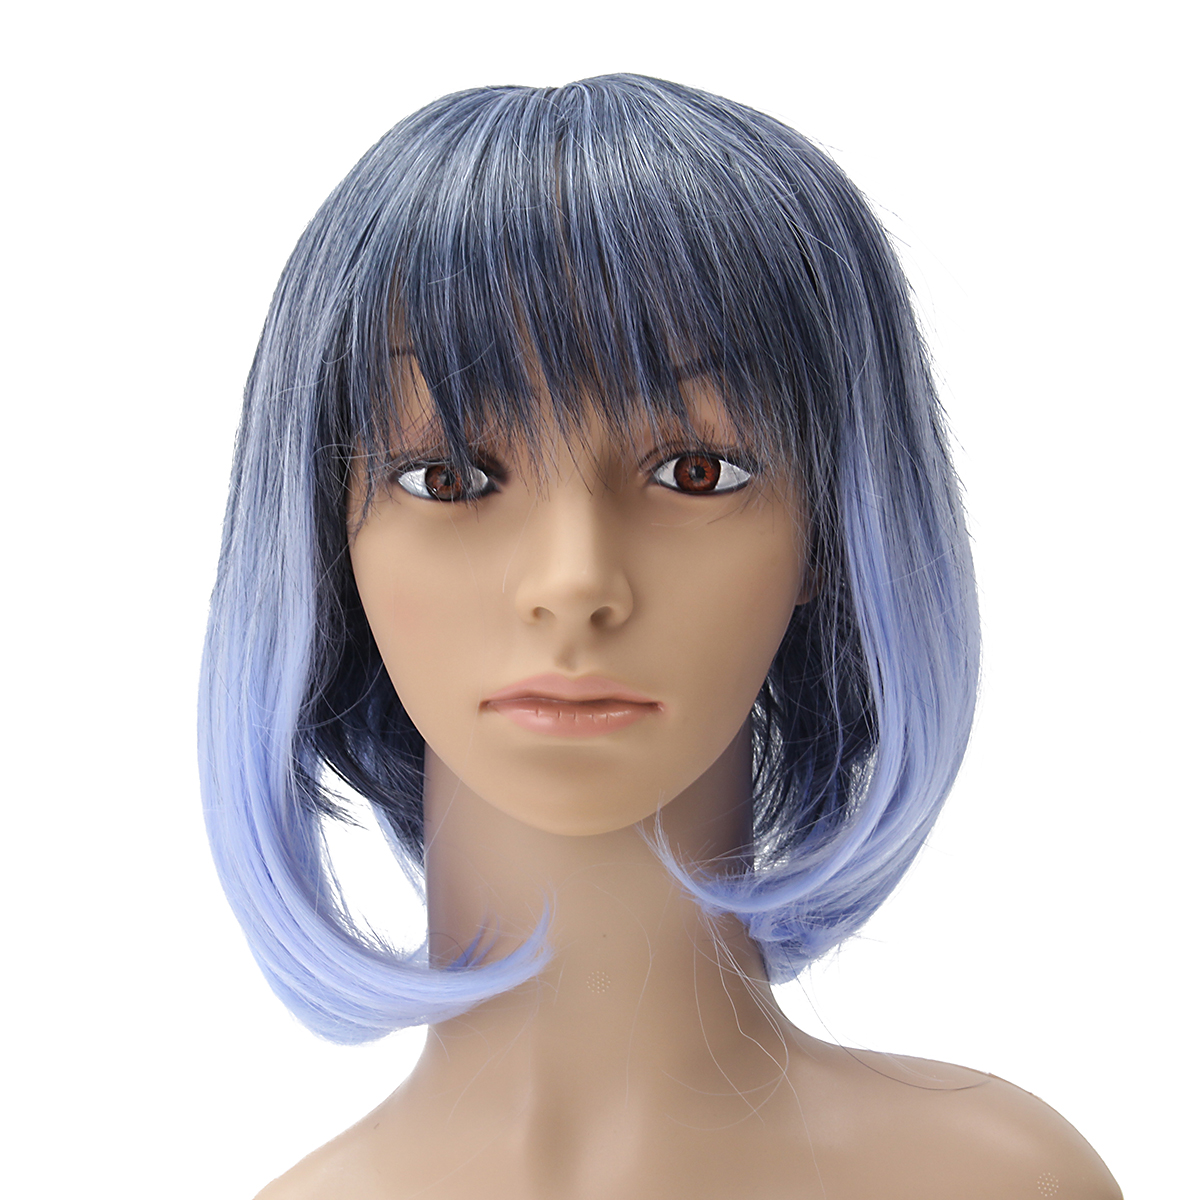 35-40cm-Blue-Gradient-Cosplay-Wig-Woman-Short-Curly-Hair-Anime-Natural-Role-Play-Capless-1133241-1